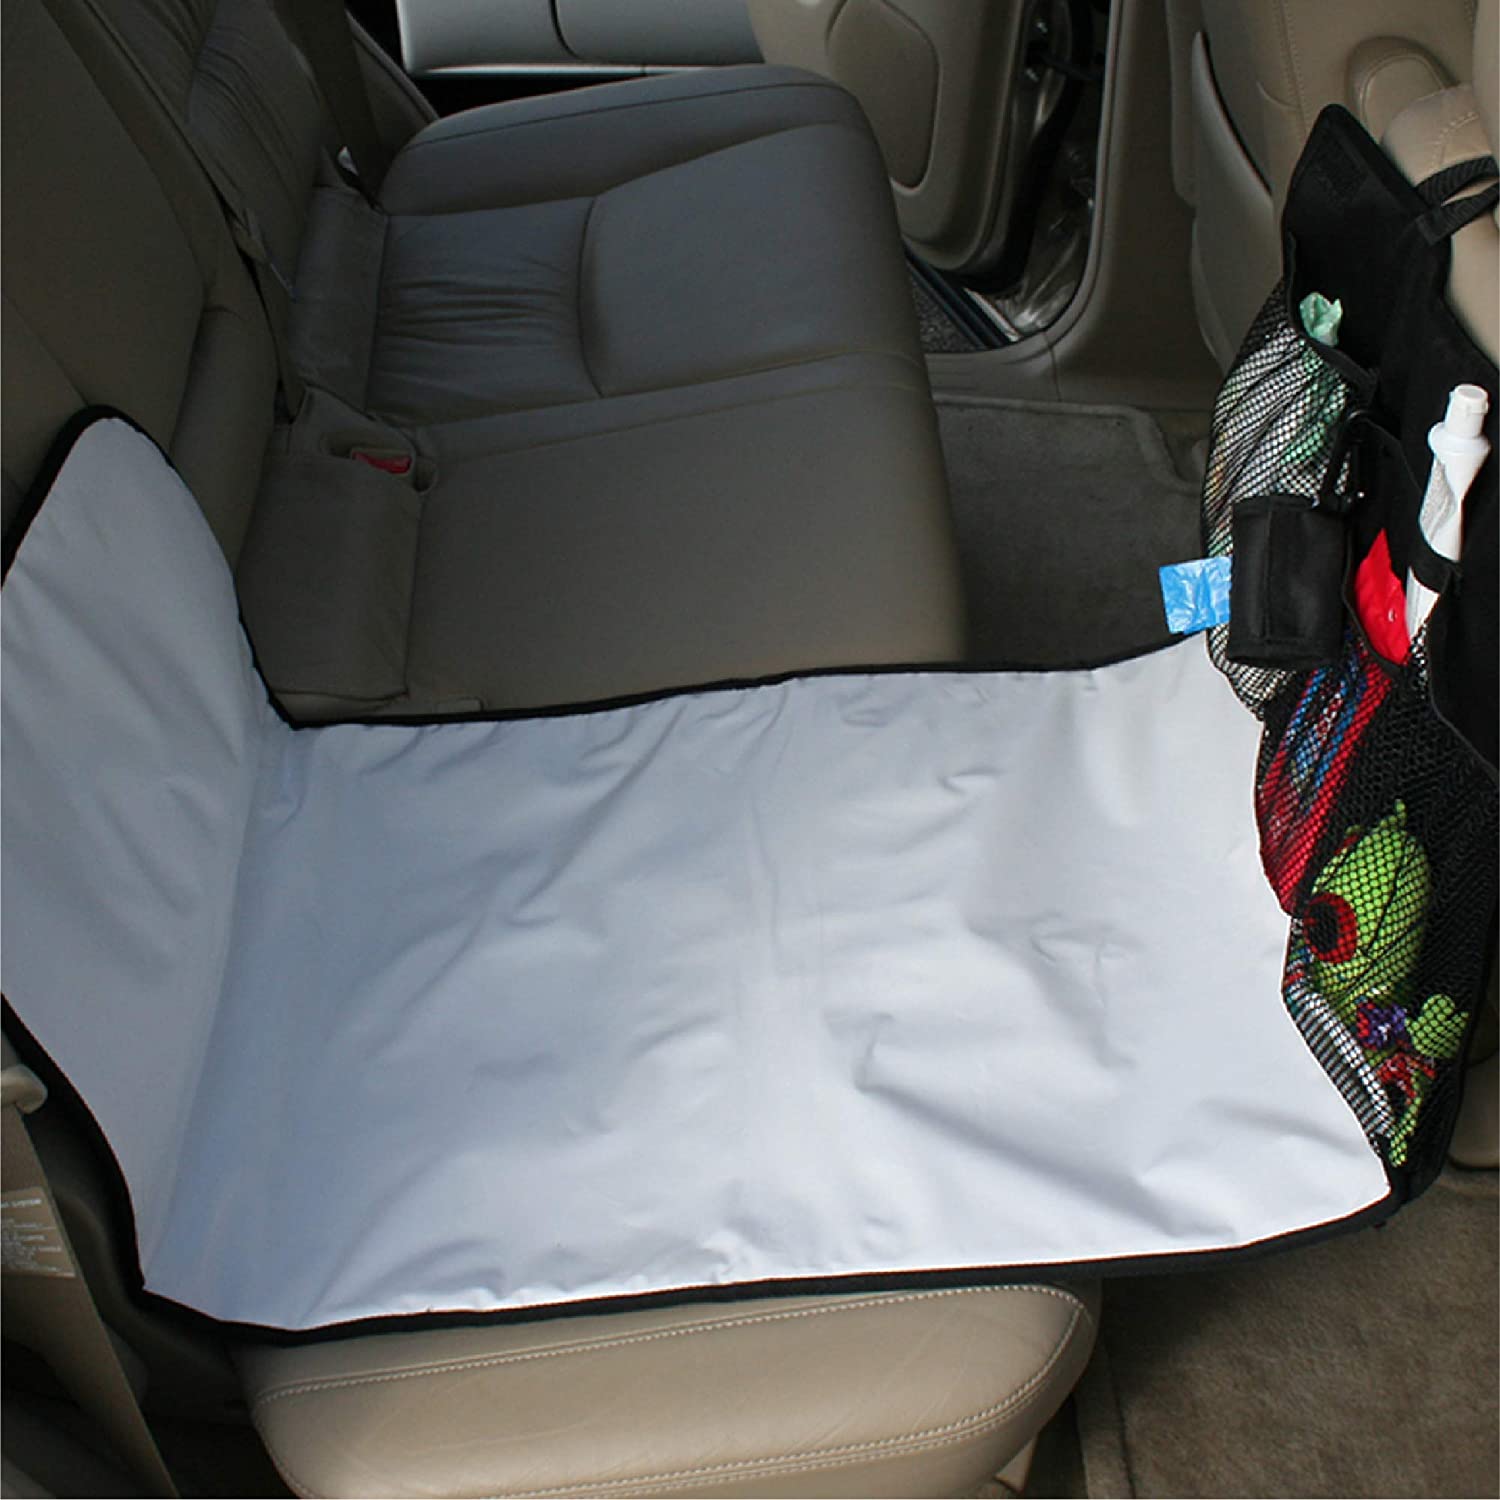 J.L. Childress Pockets \'N Pad, Portable Diapering Station for Your Vehicle, Detachable Changing Pad, Pocket Panel for Storage, Fully Padded, X-Large Dimensions (36" x 18"), Black